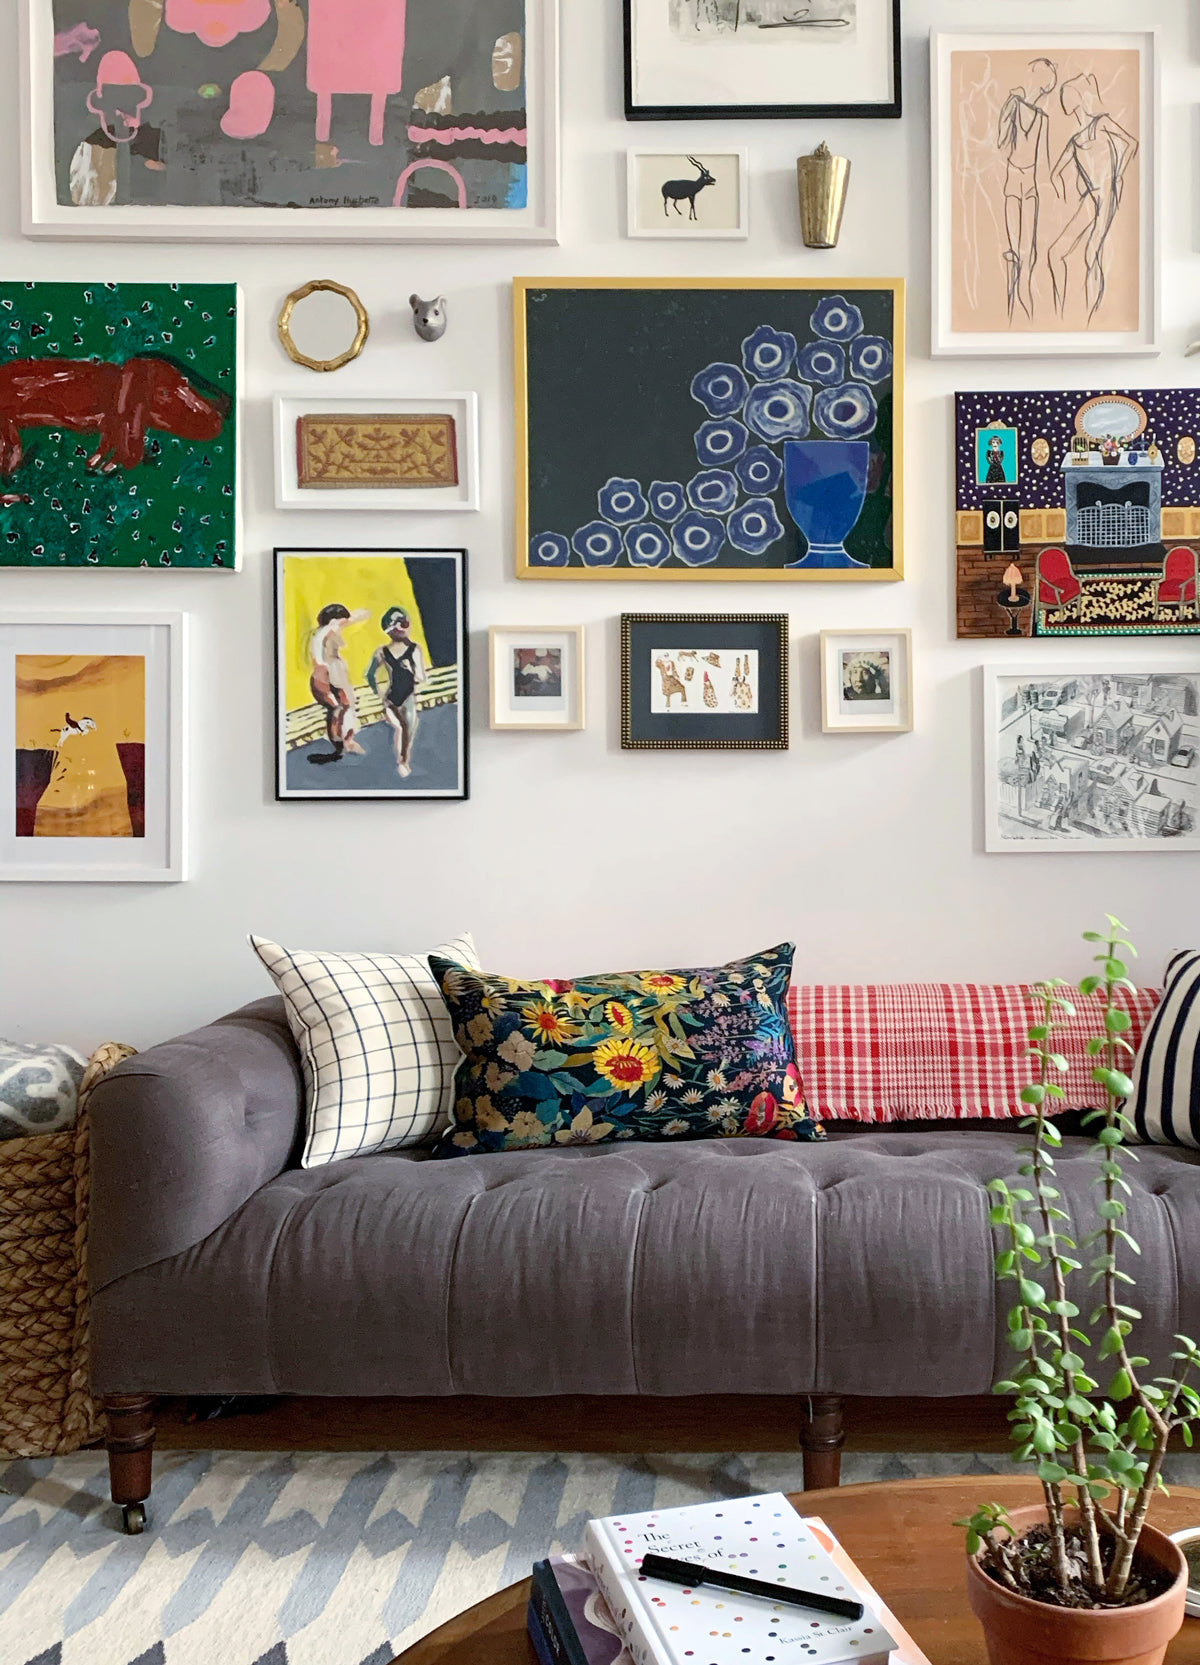 The Brooklyn Home Store That Lets You Shop Like an Interior Designer